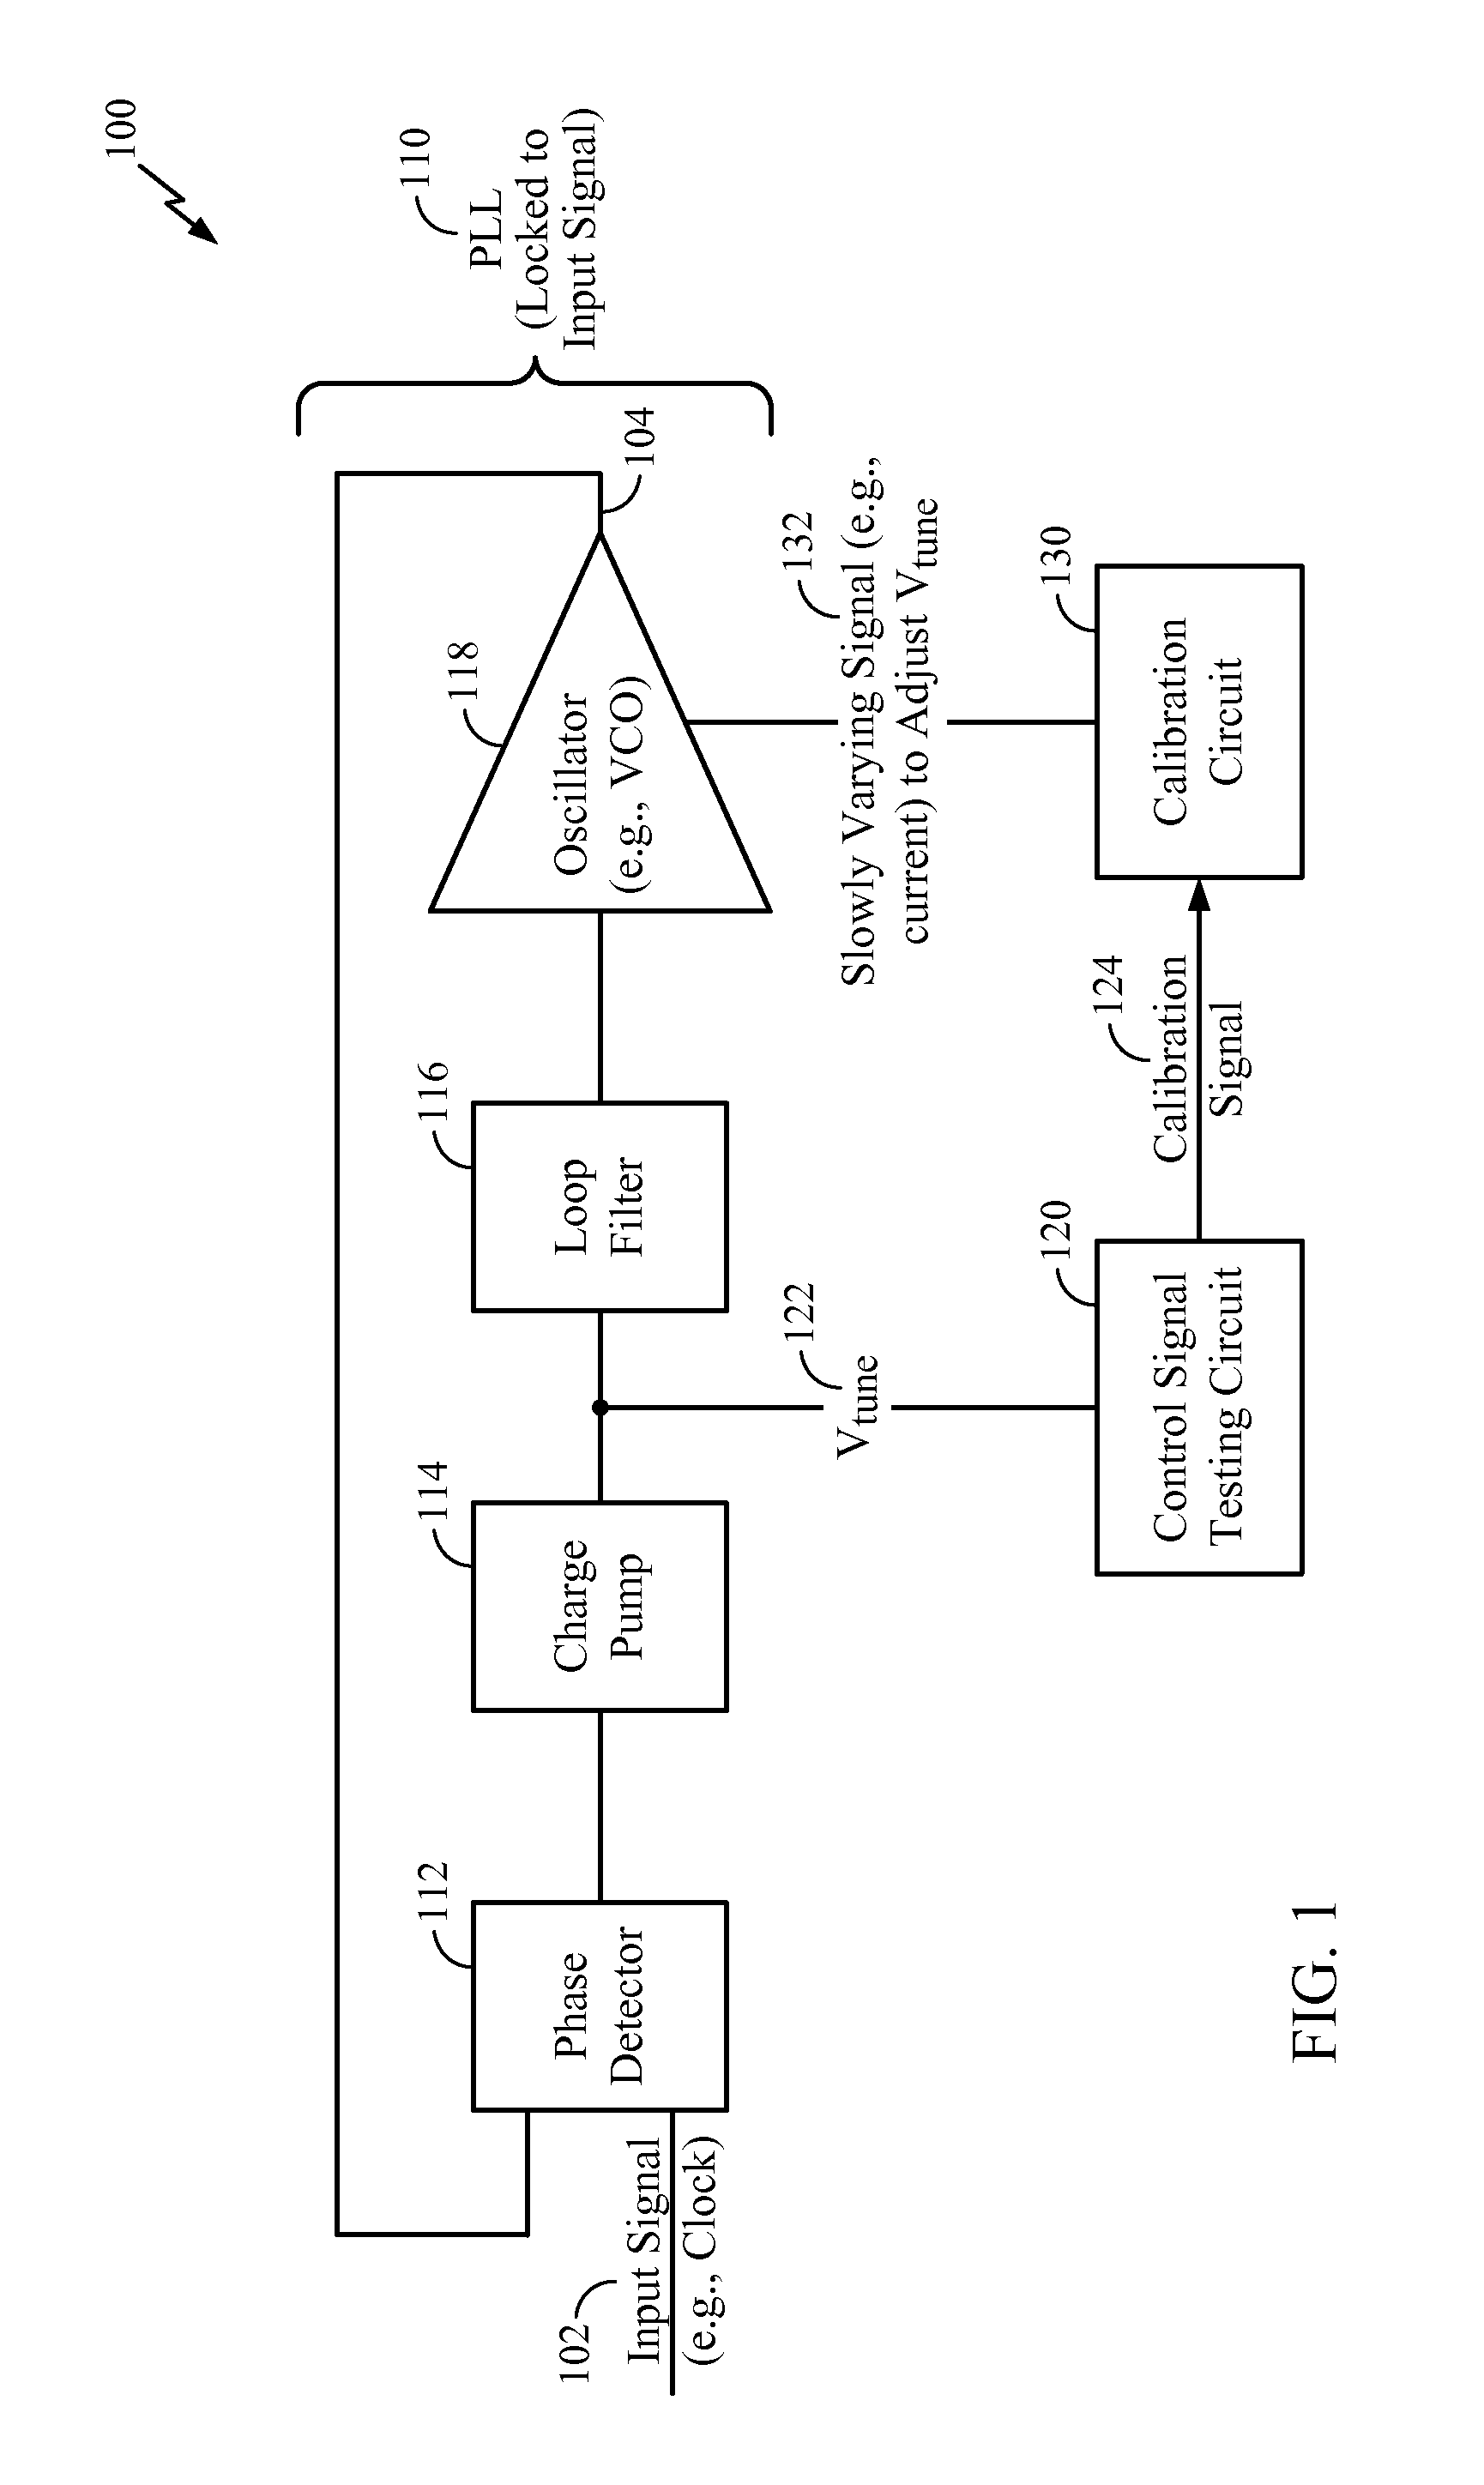 System and method of calibrating a phase-locked loop while maintaining lock